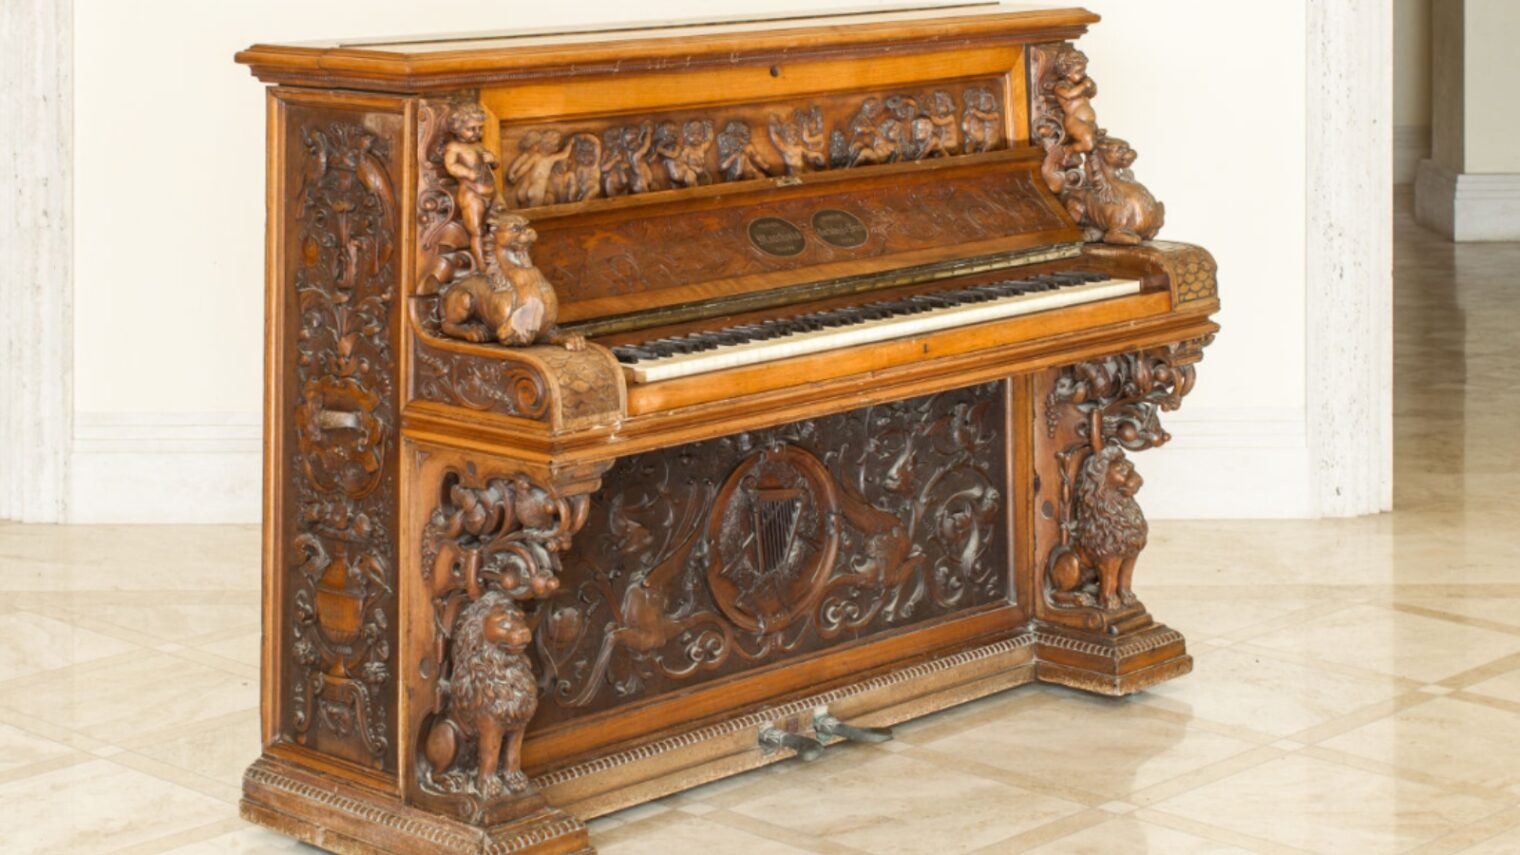 The Immortal Piano of Siena, up for auction in Israel. Photo courtesy of Winner’s Auction House